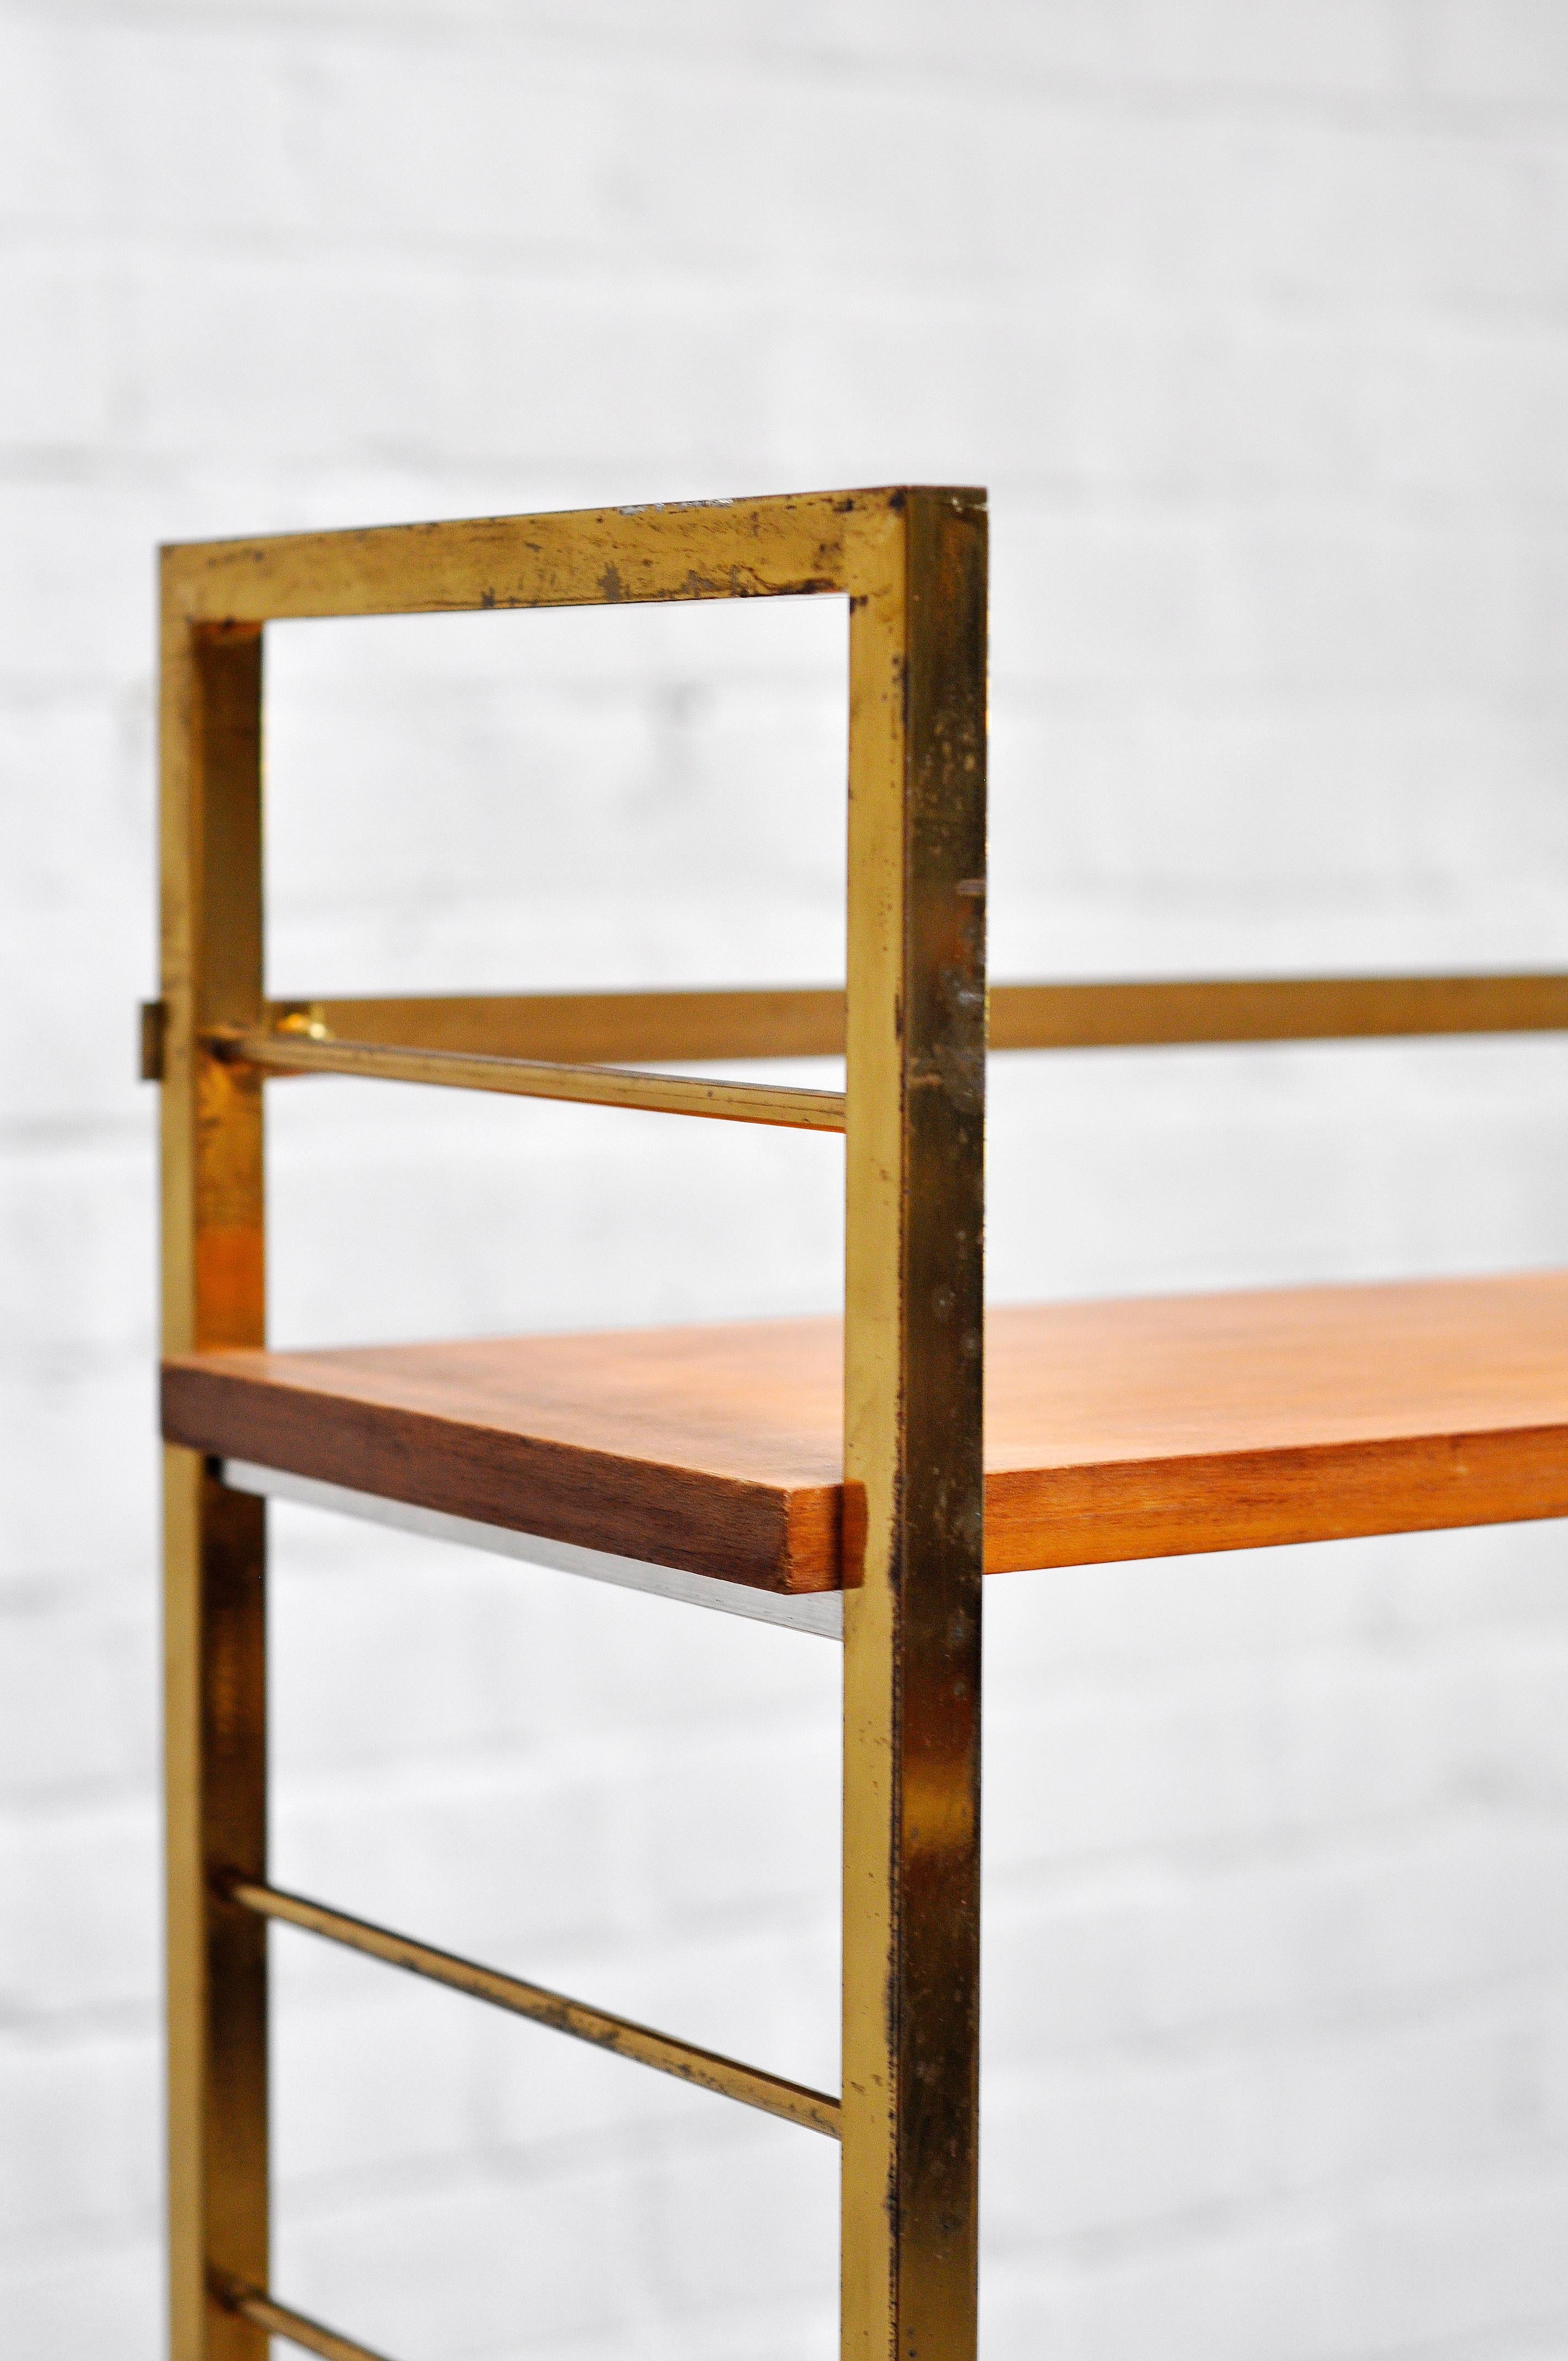 Brass Mid-century Italian Bookcase Or Shelving Unit, 1960's For Sale